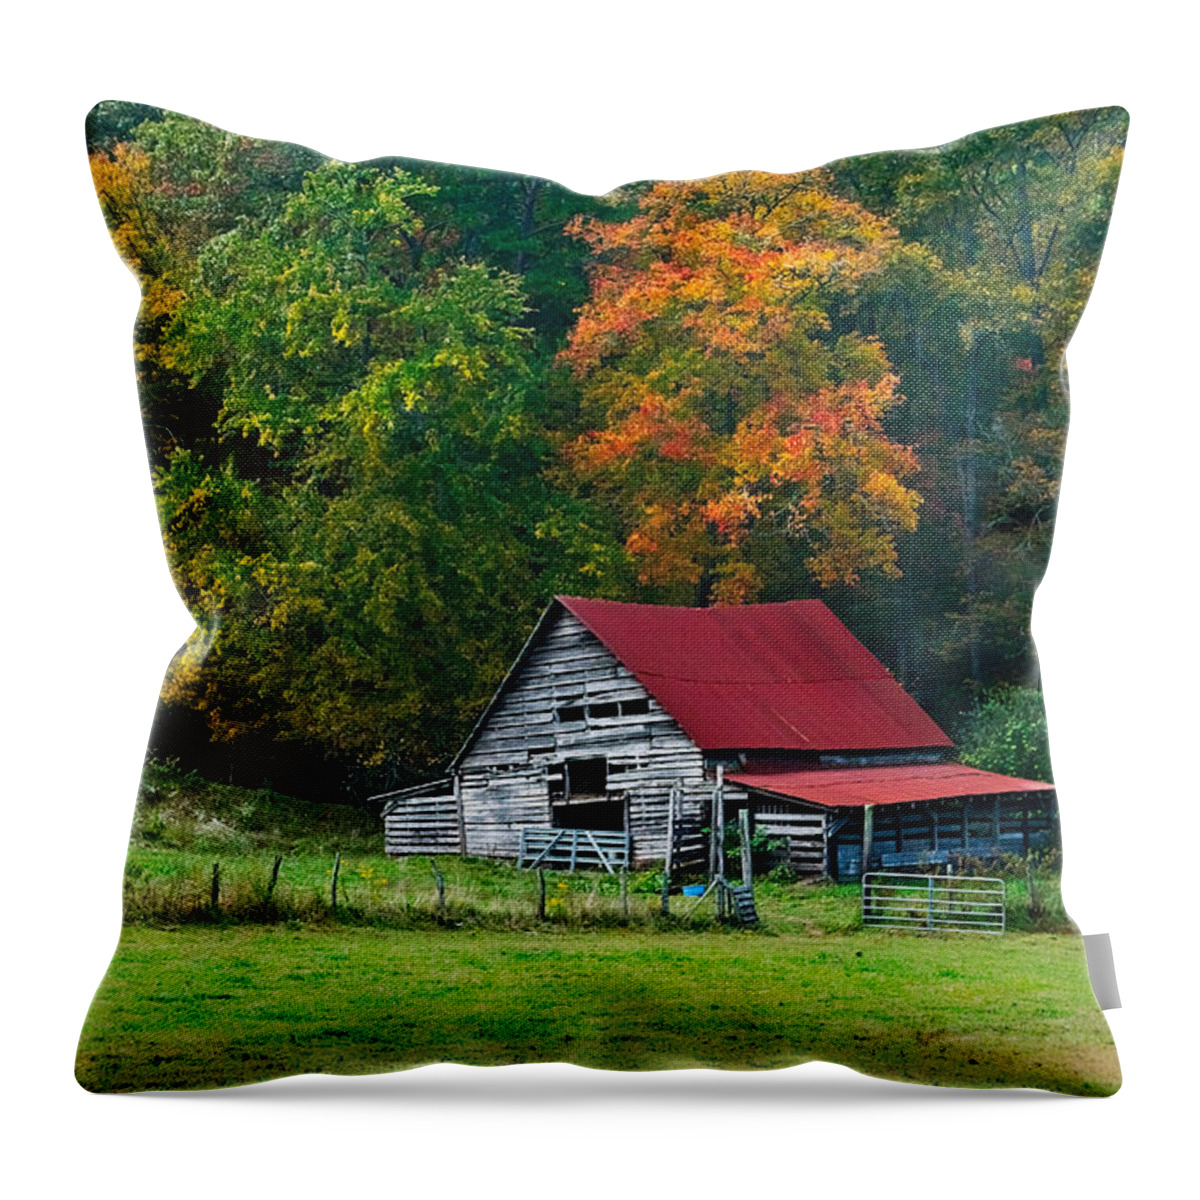 Appalachia Throw Pillow featuring the photograph Candy Mountain by Debra and Dave Vanderlaan